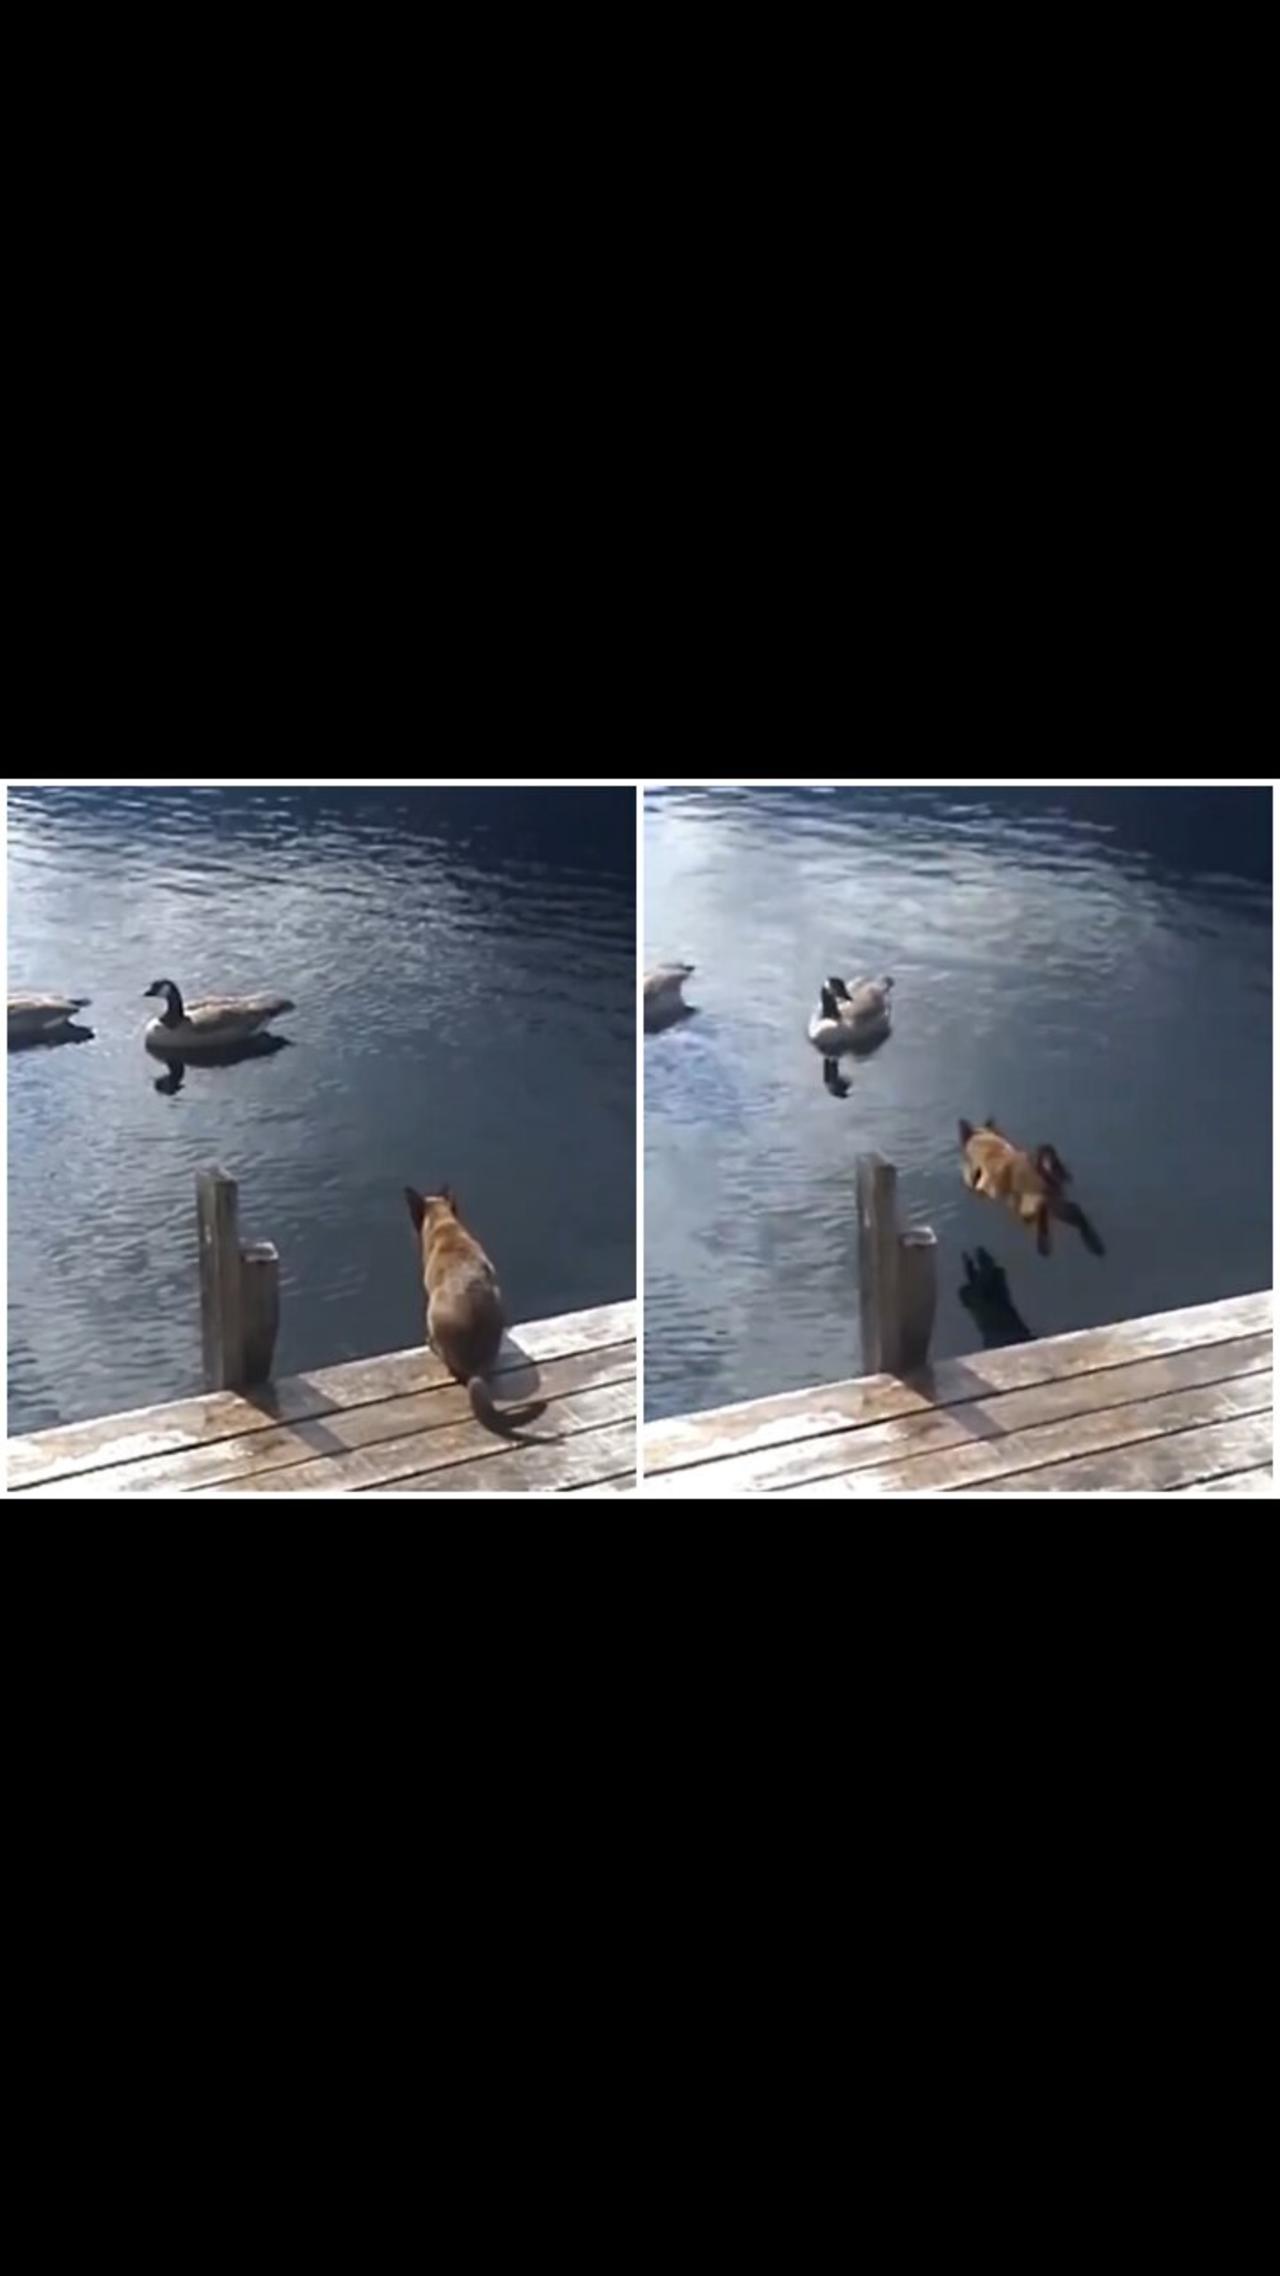 My pet jump in the lake and catching duck